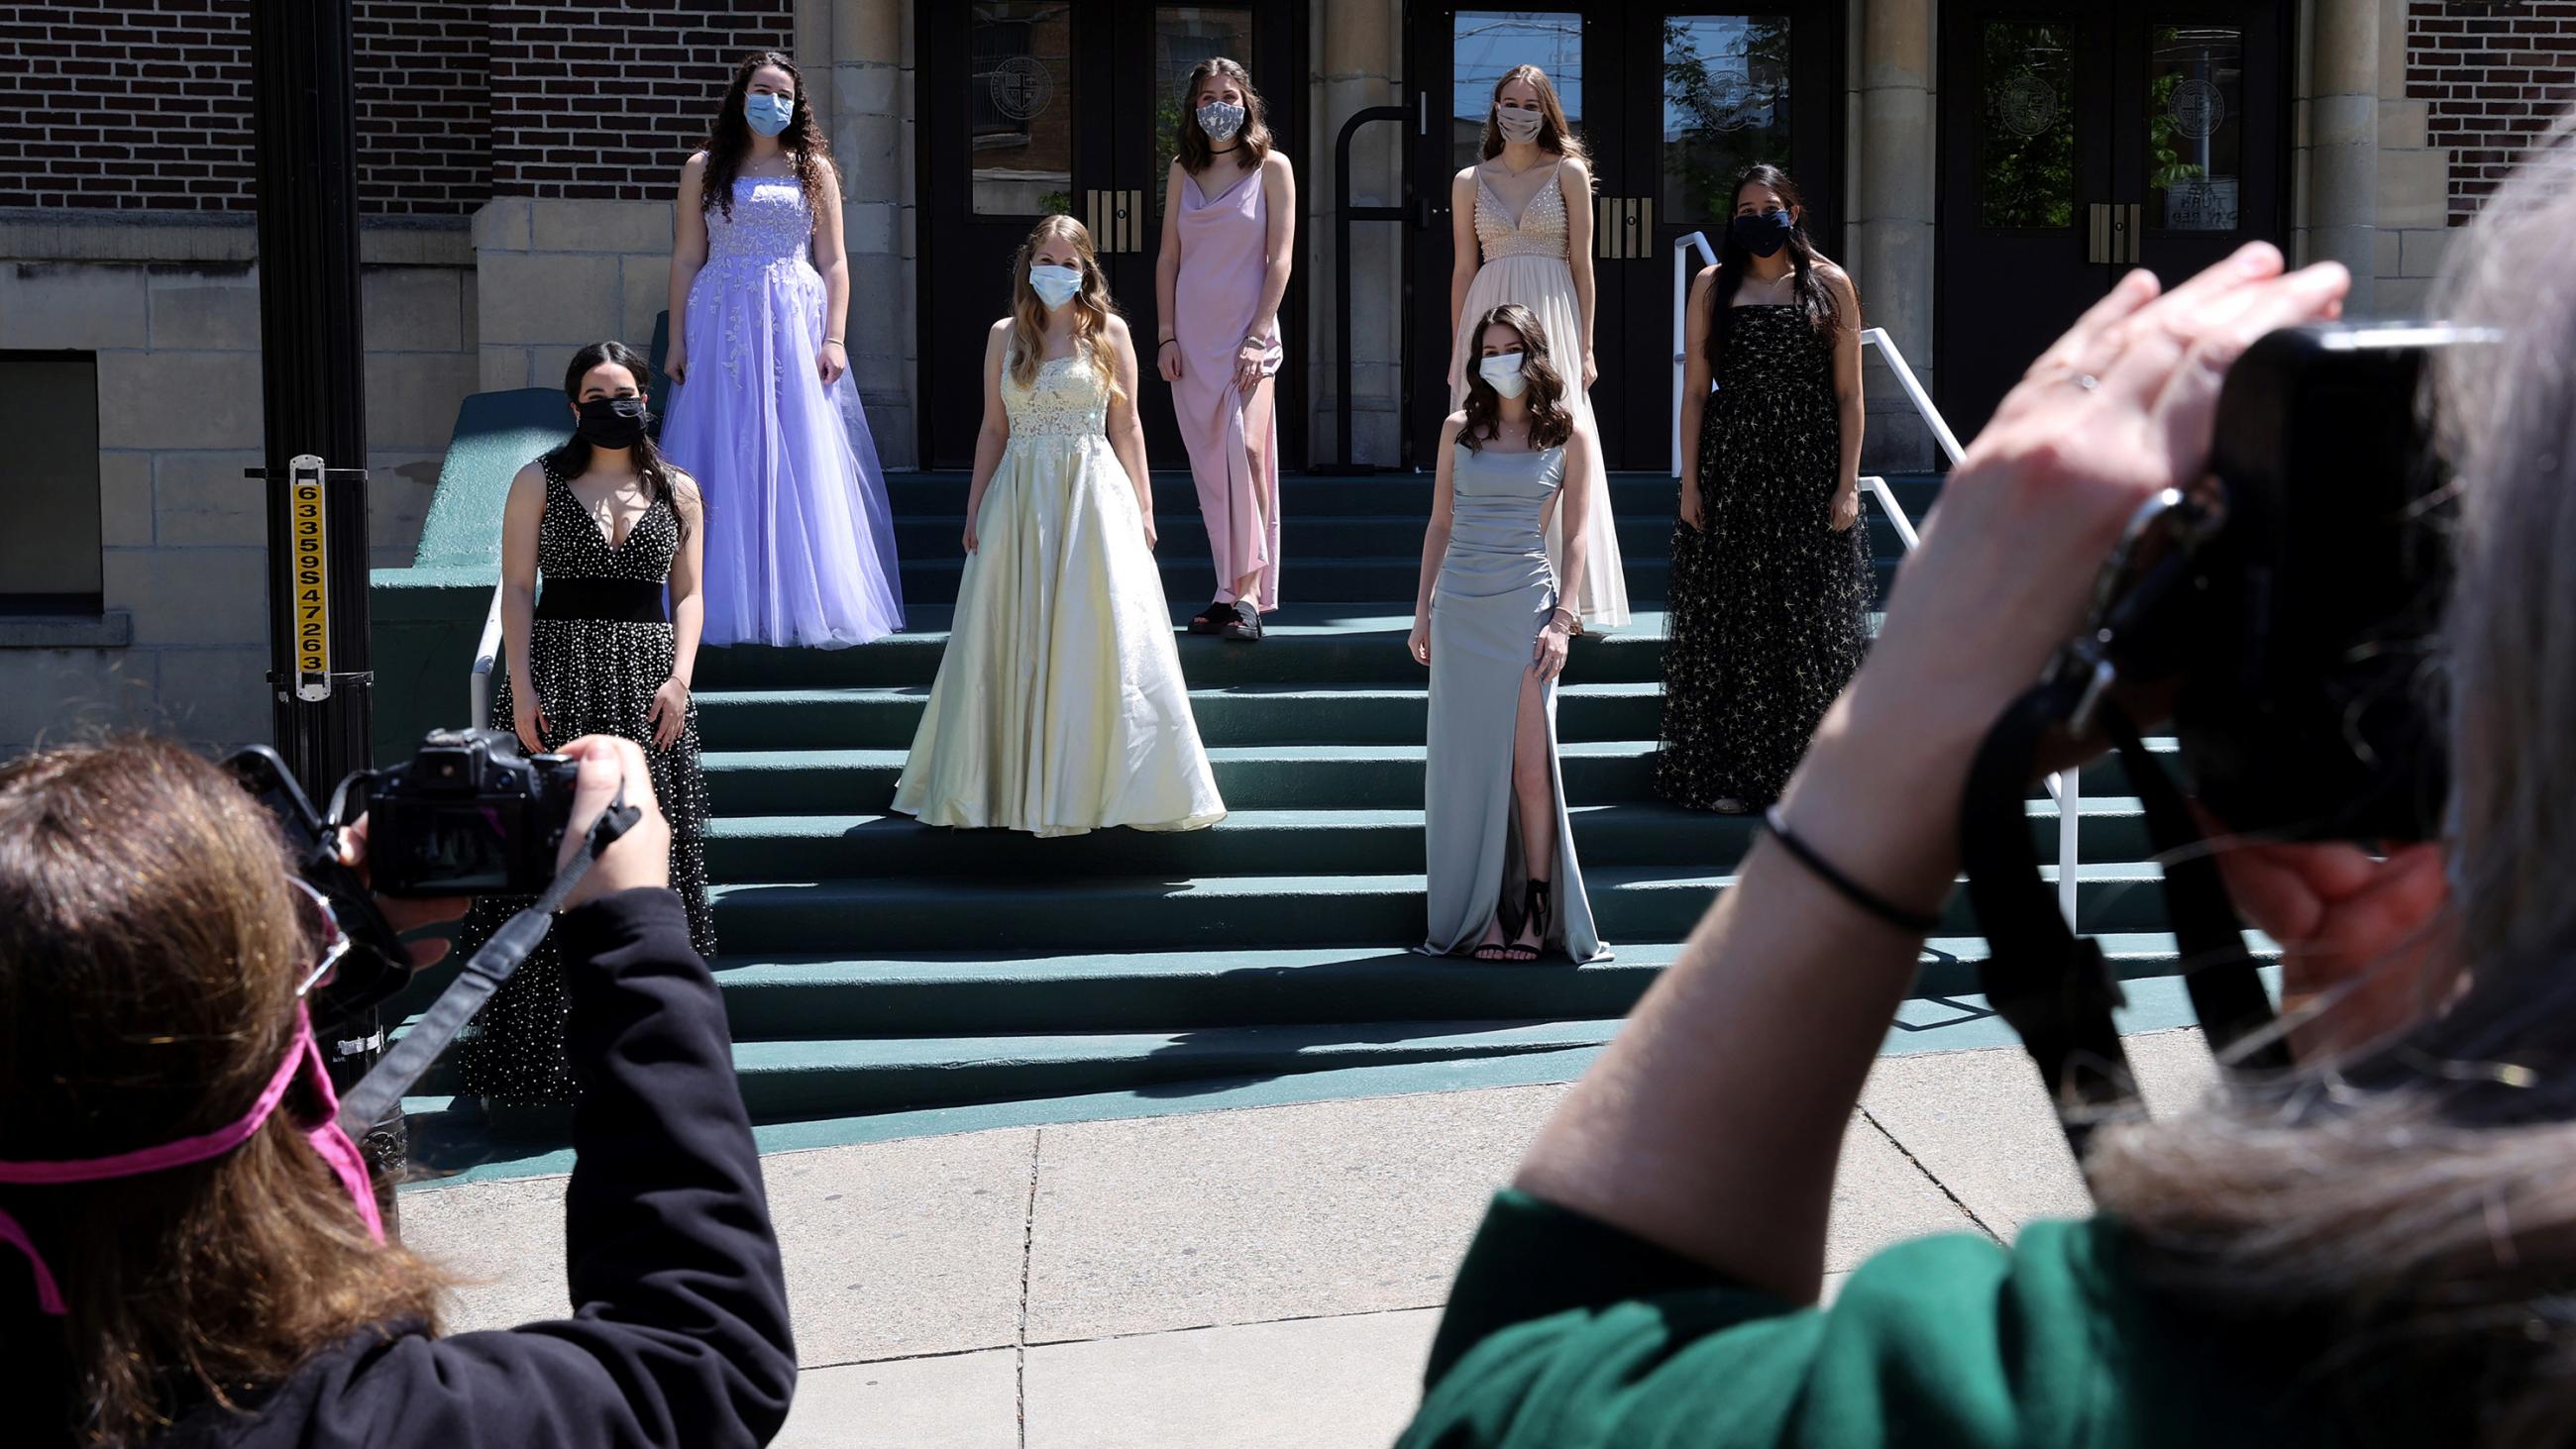 The photo shows several young women in Prom dresses posing on some steps while others (presumably their parents) take photos. 